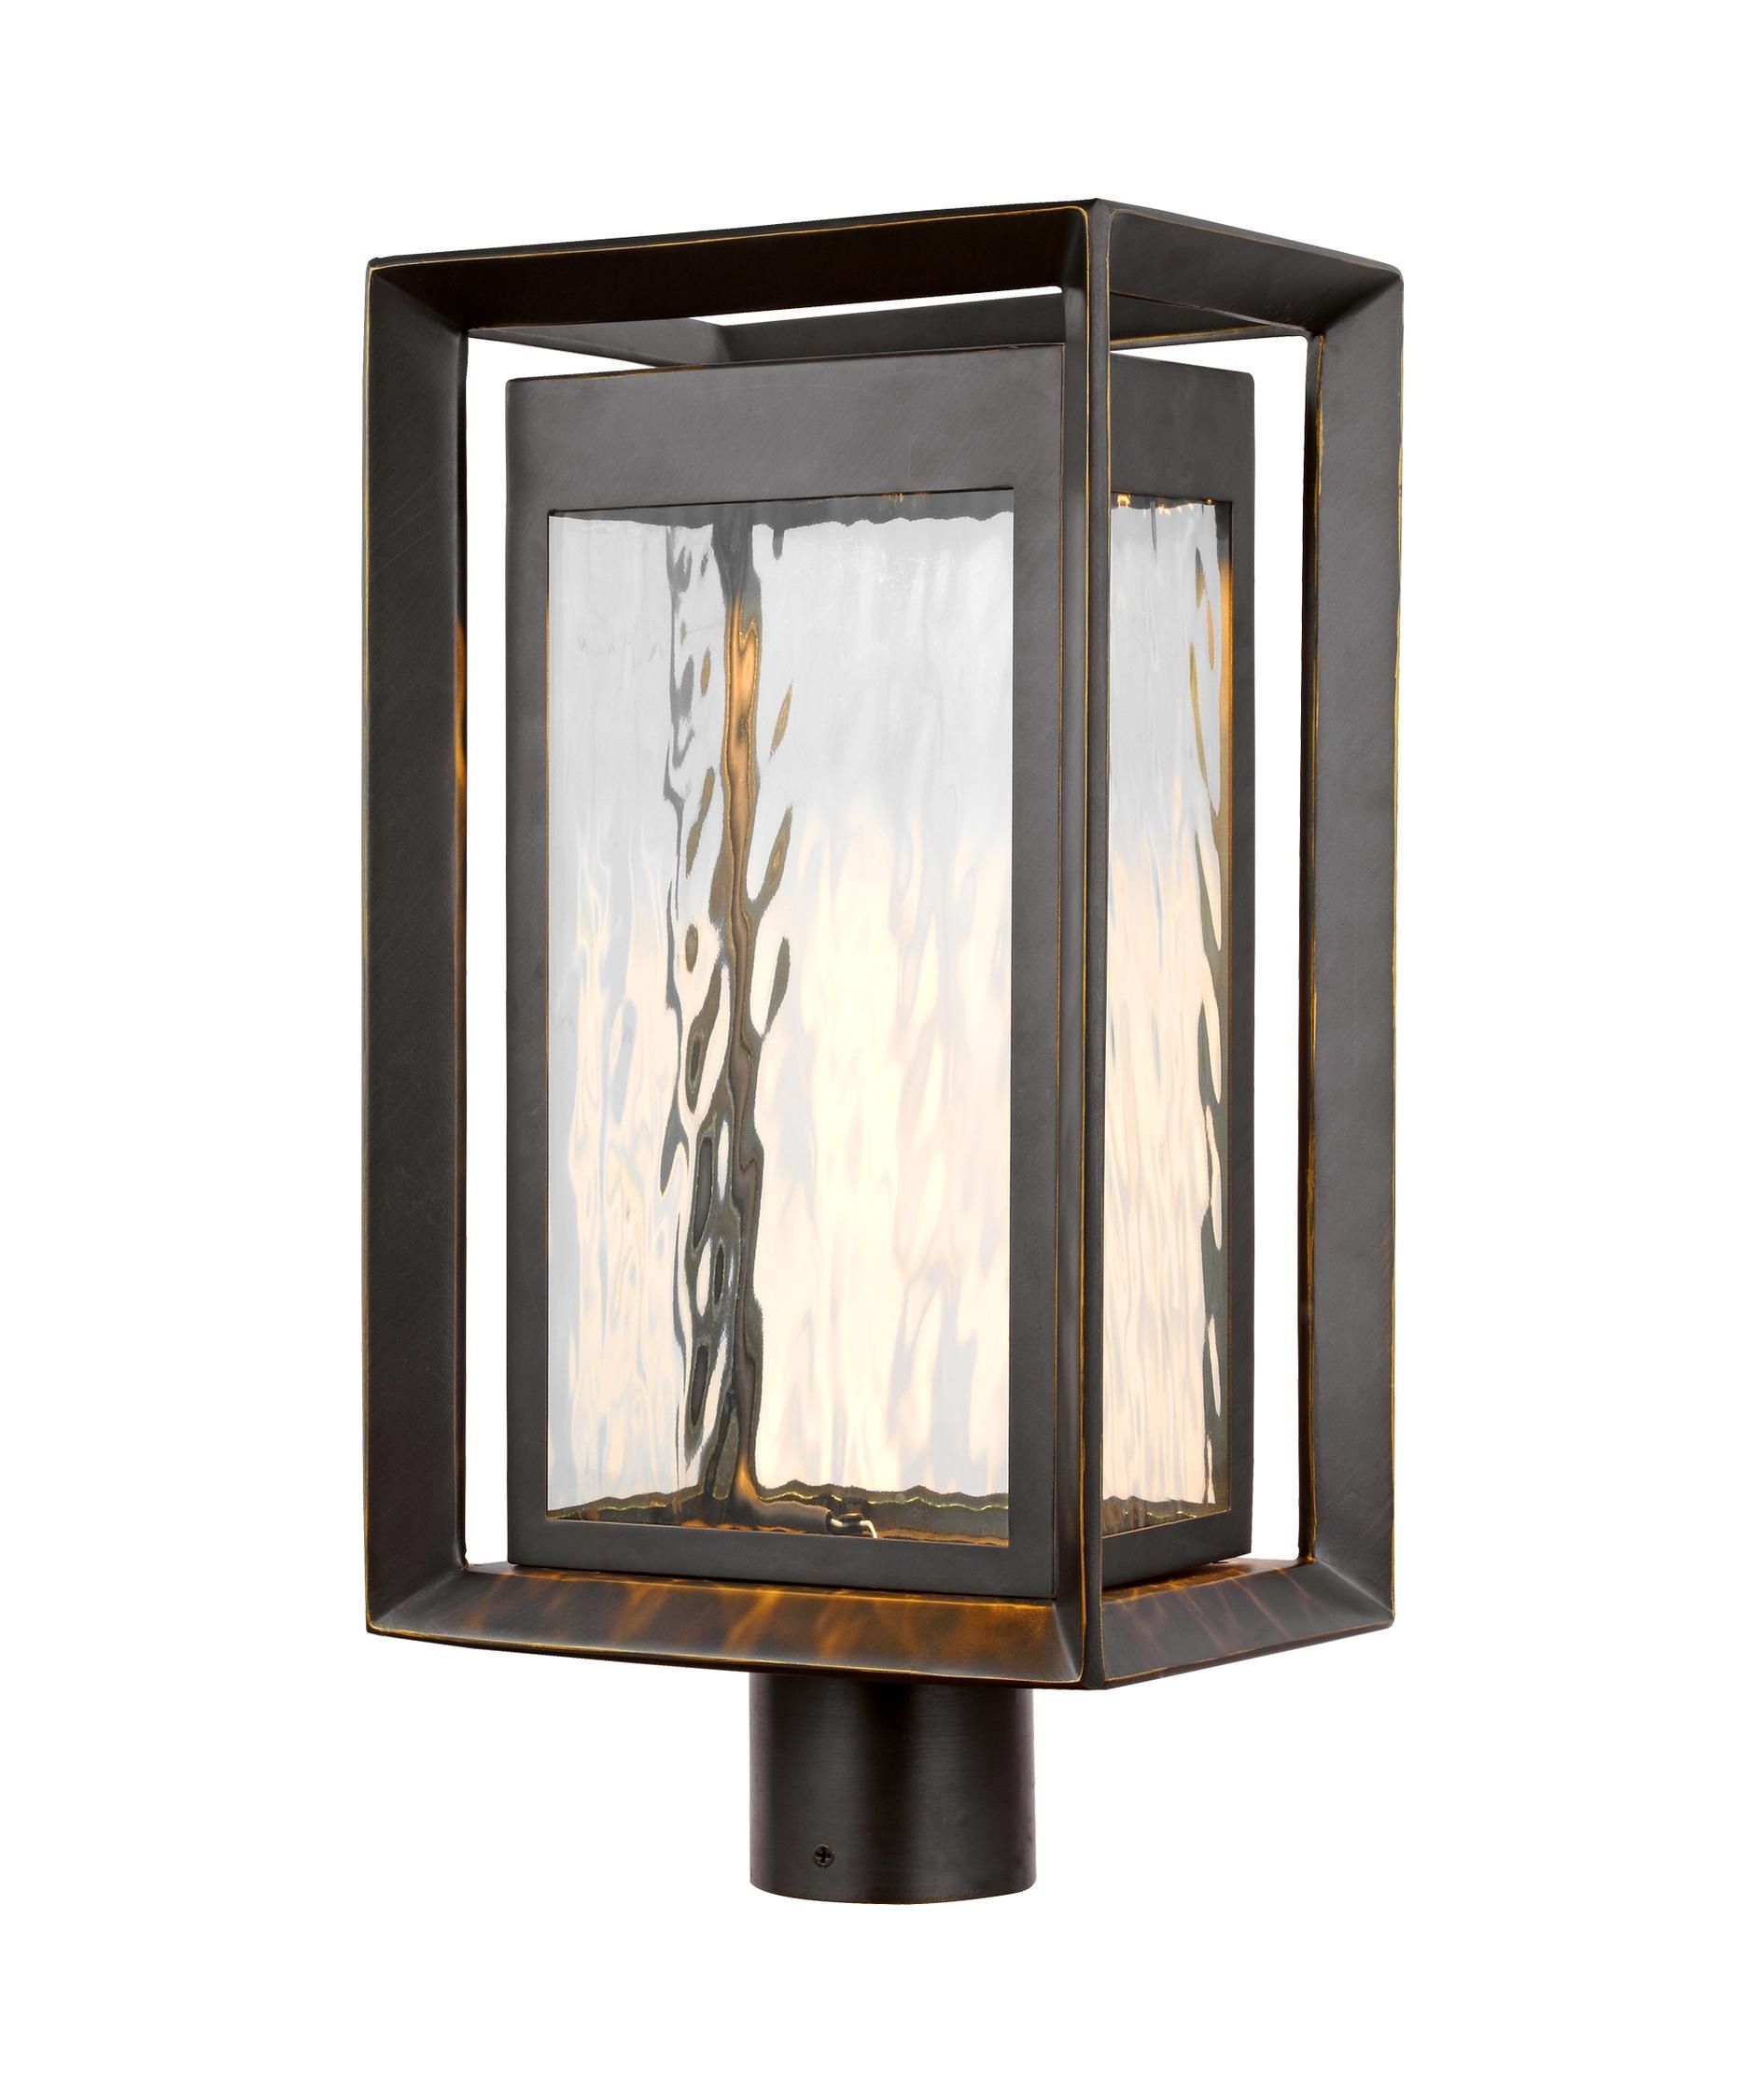 Murray Feiss Ol13707 Urbandale Energy Smart 1 Light Outdoor Post With Regard To Outdoor Wall And Post Lighting (View 12 of 15)